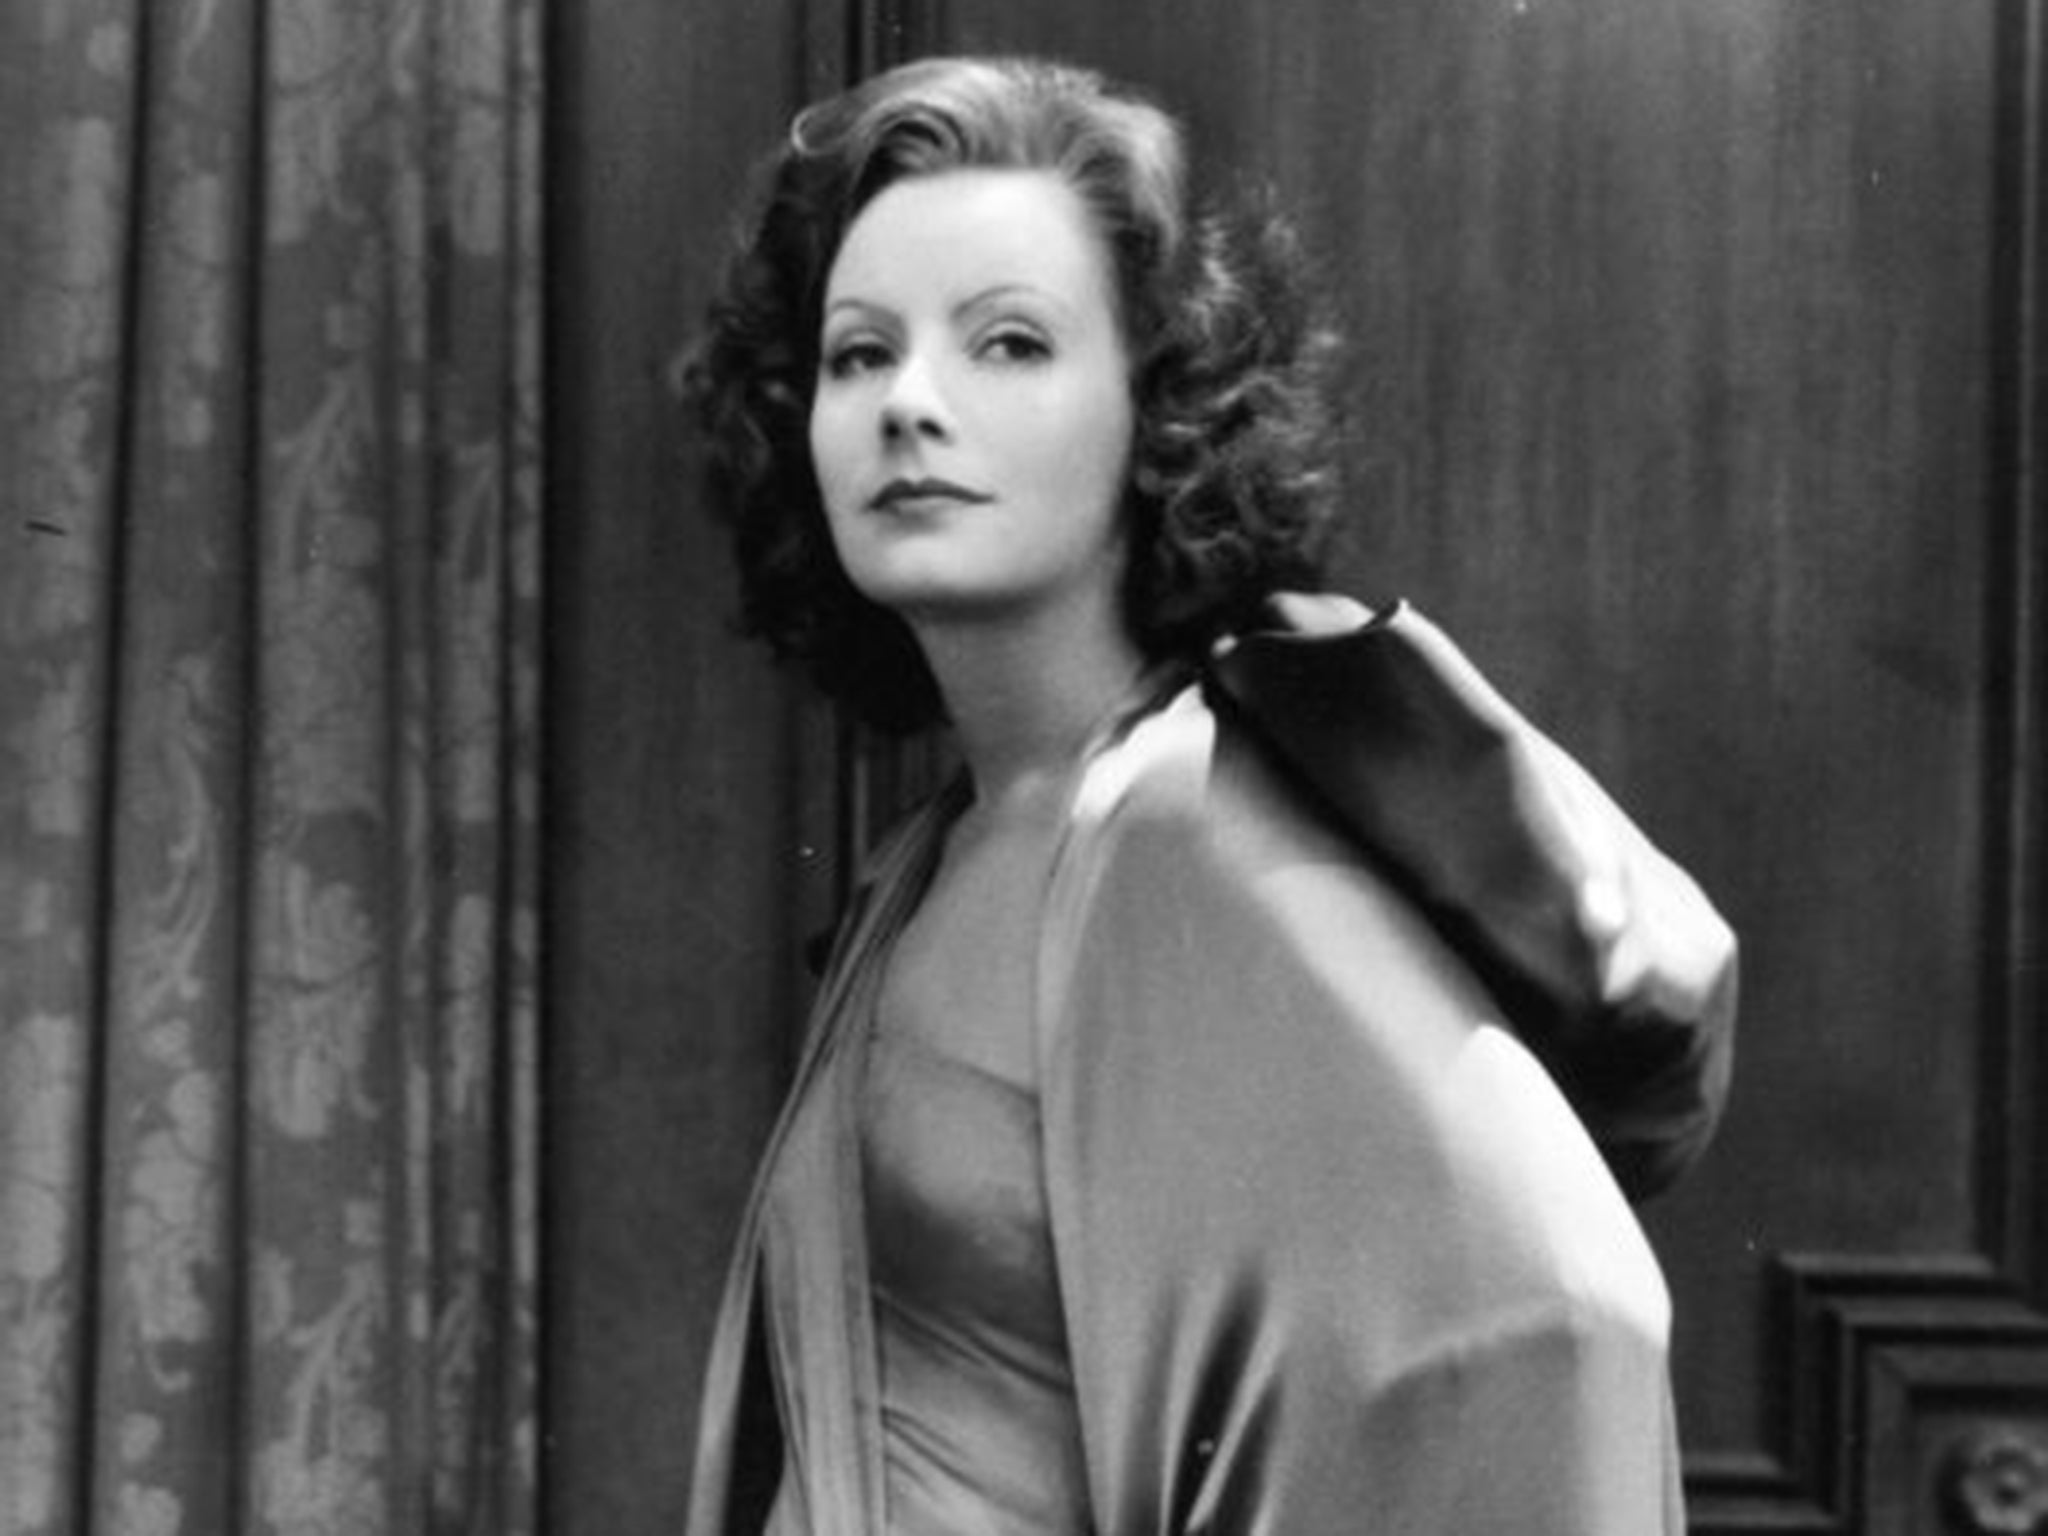 Many preferred to watch the films of Greta Garbo to those about back-street squalor